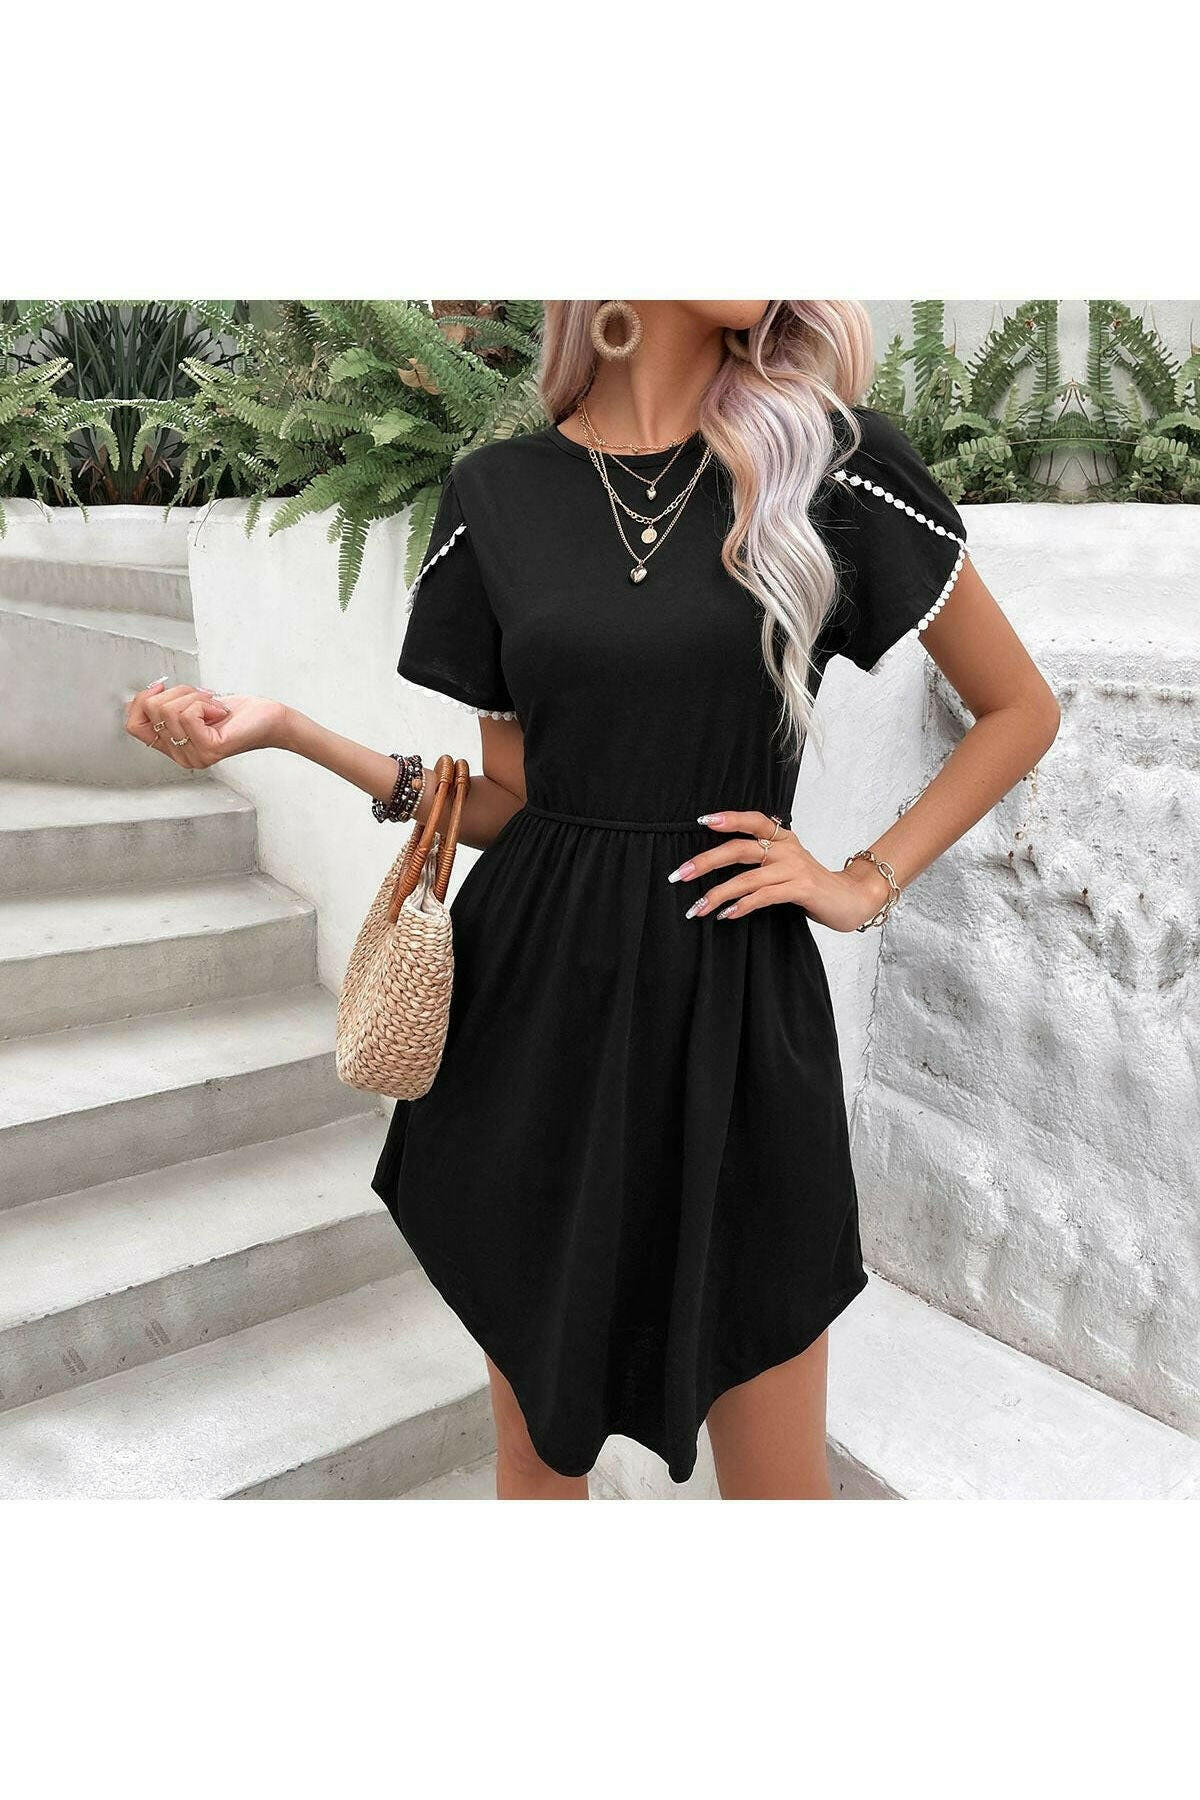 Round Neck Petal Sleeve Dress with Pockets.